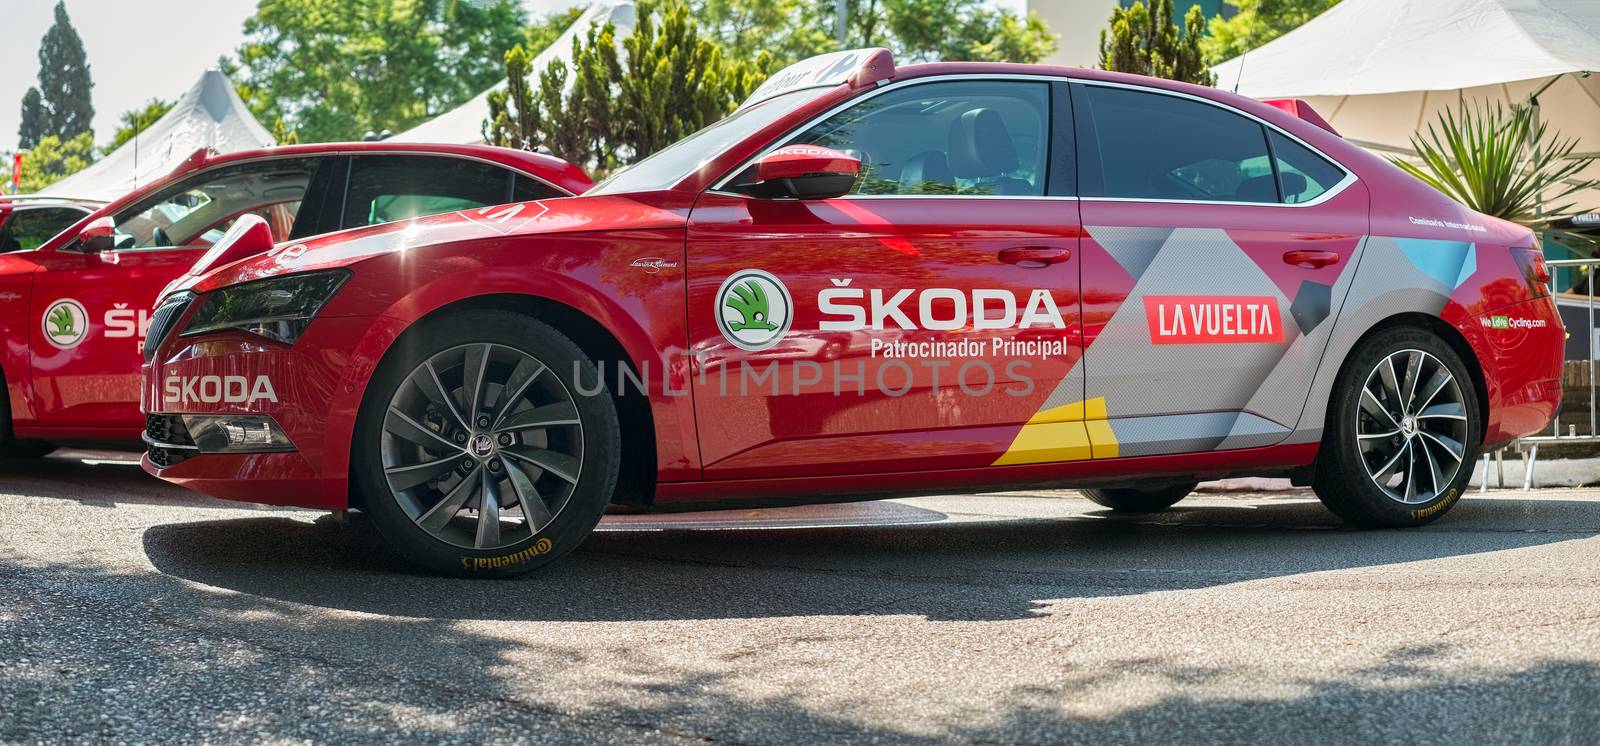 Marbella, Spain - August 26th, 2018. The SKODA advertisement cars parked at the start of the Vuelta de Espana 2018, stage 2, Marbella, Costa del sol, Spain.